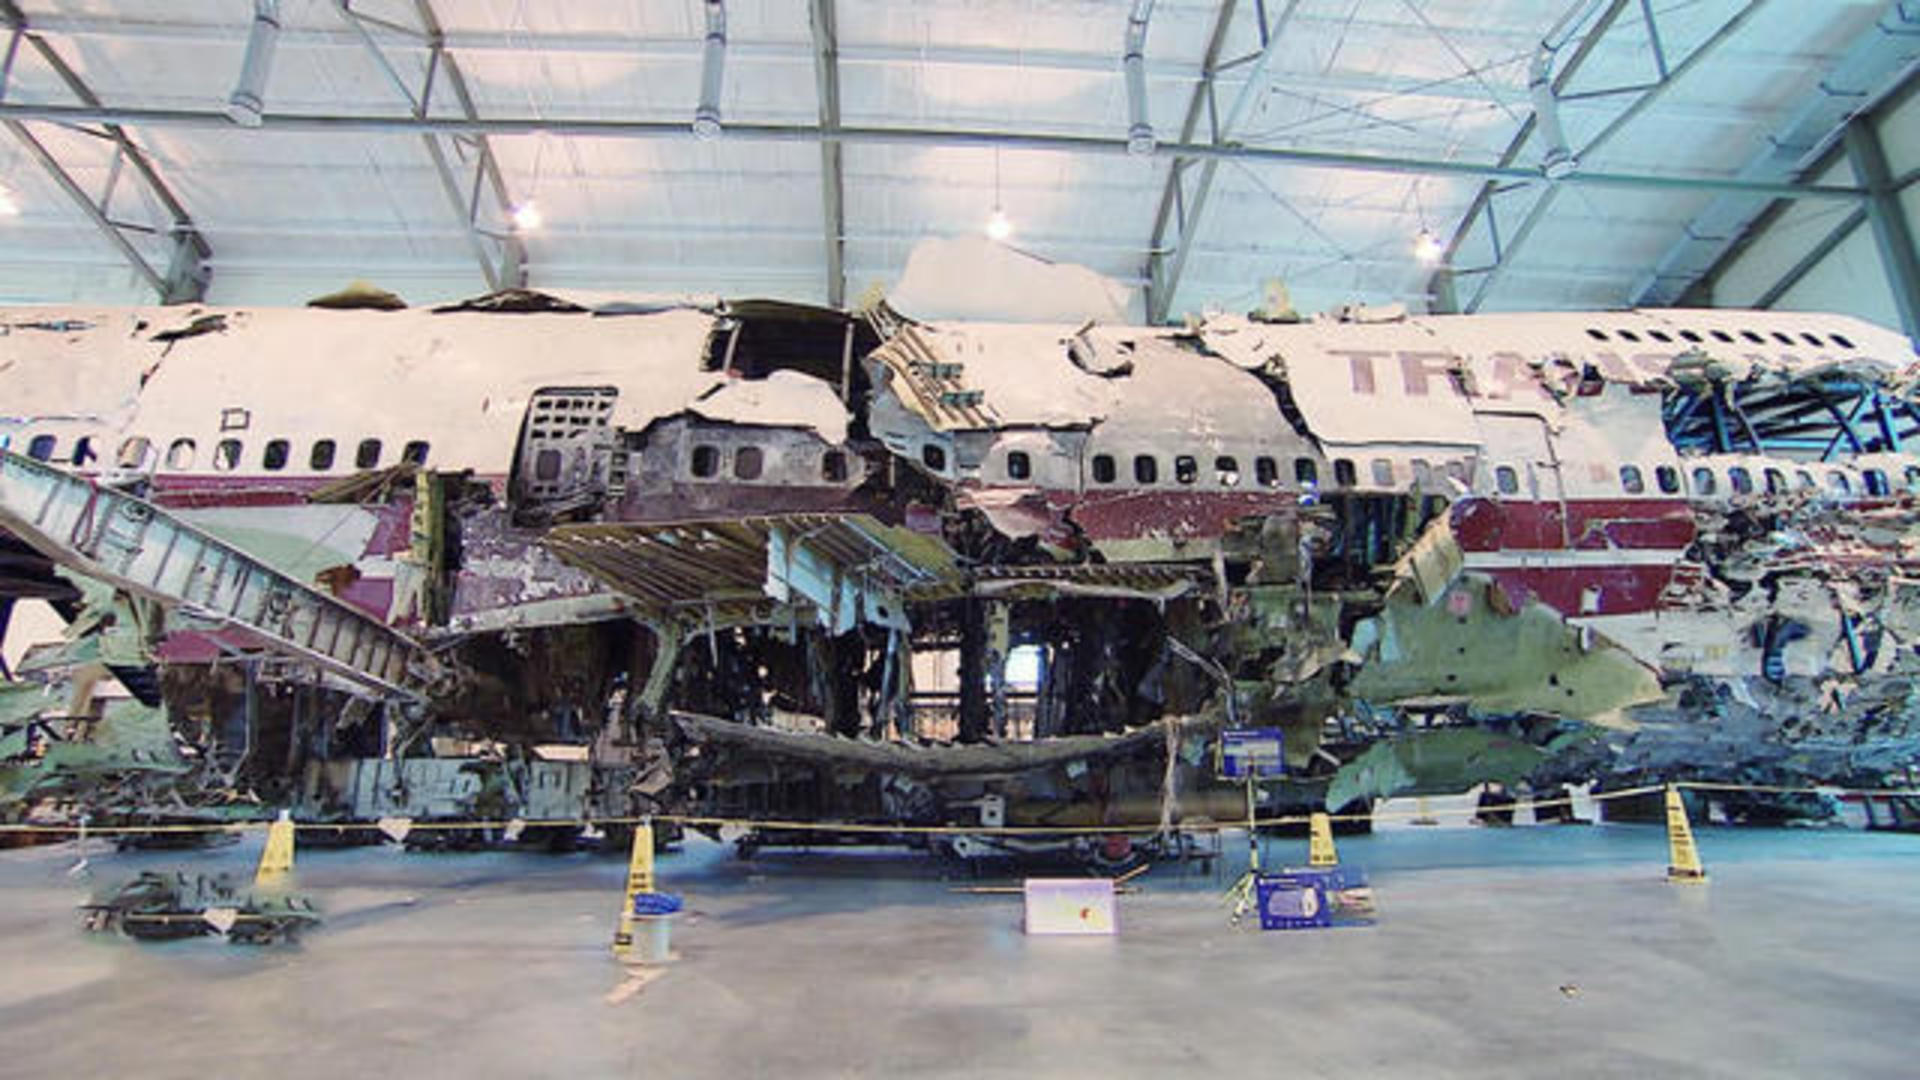 TWA Flight 800 gets another look 17 years later - CBS News